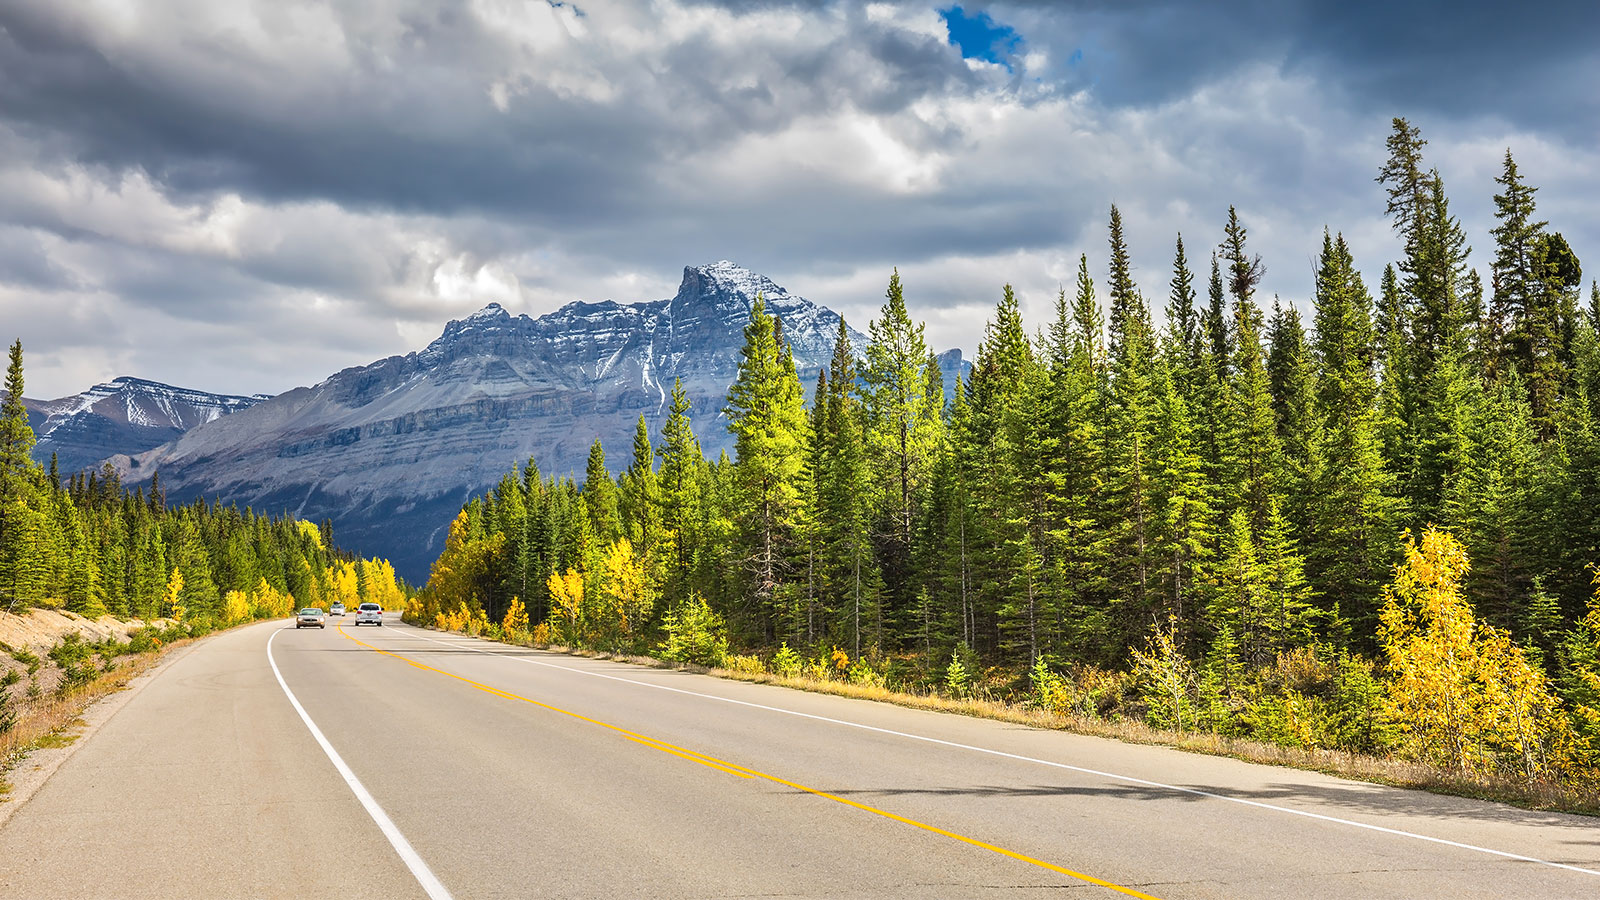 Canadian highway through a forest with Rocky mountains in the background